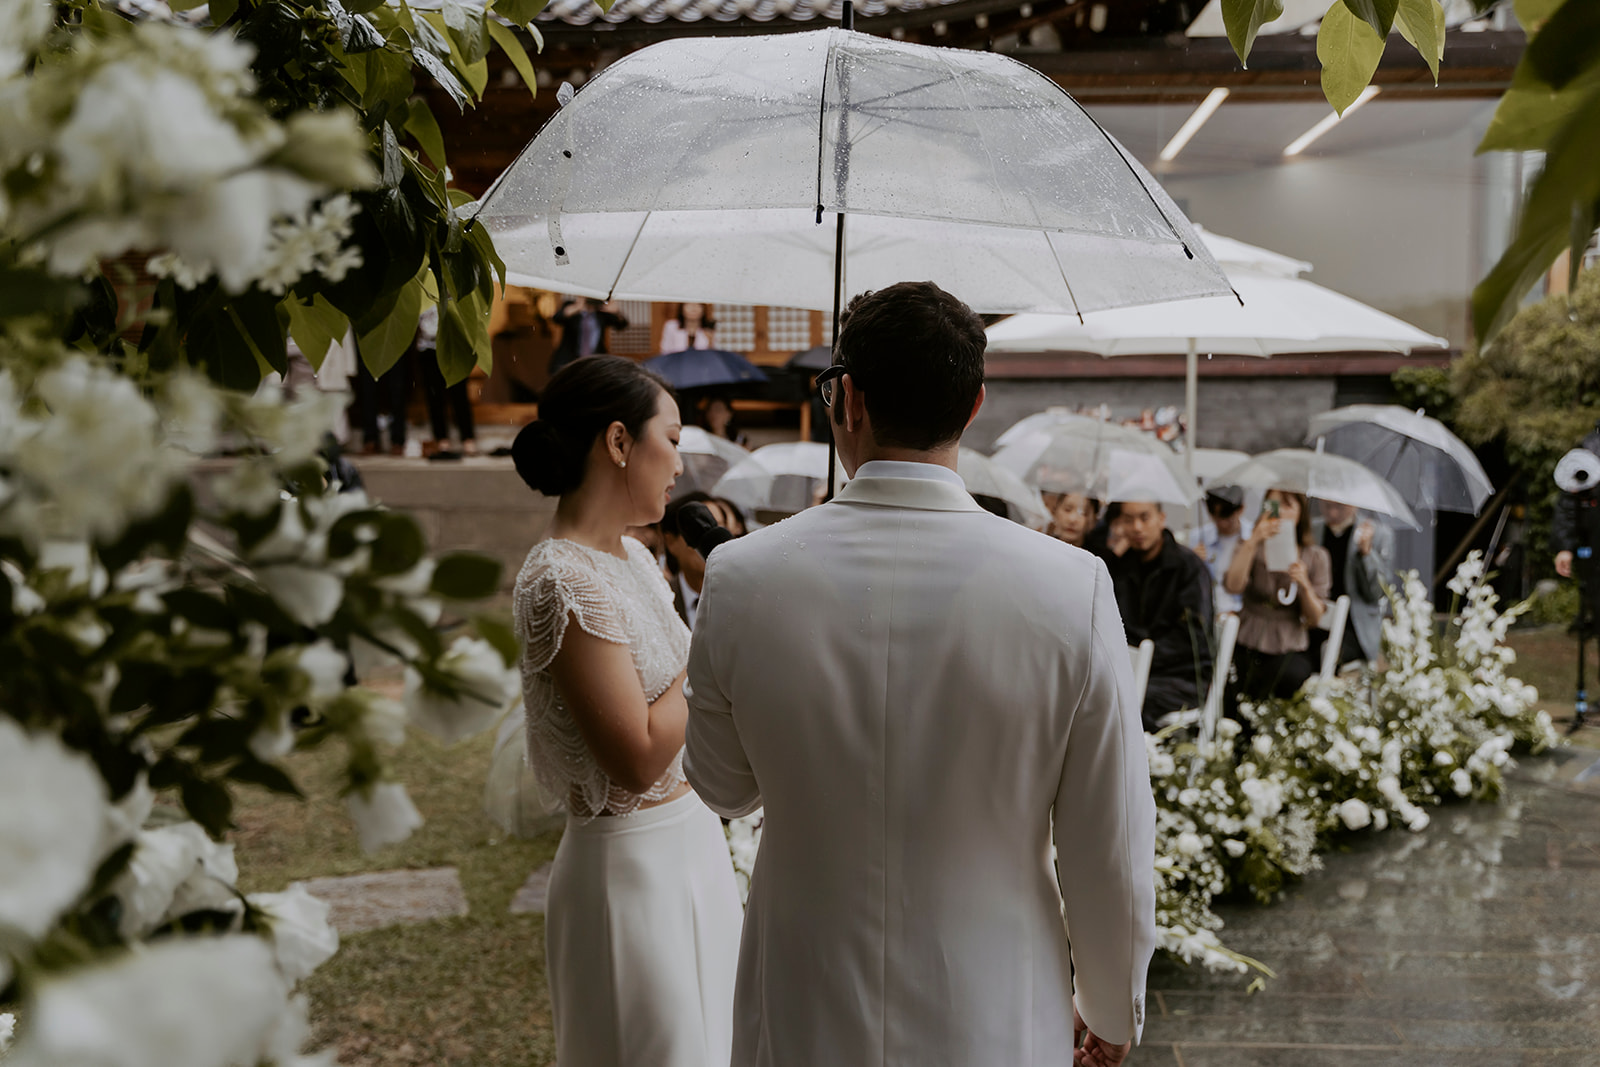 A bride and groom standing under an umbrella.